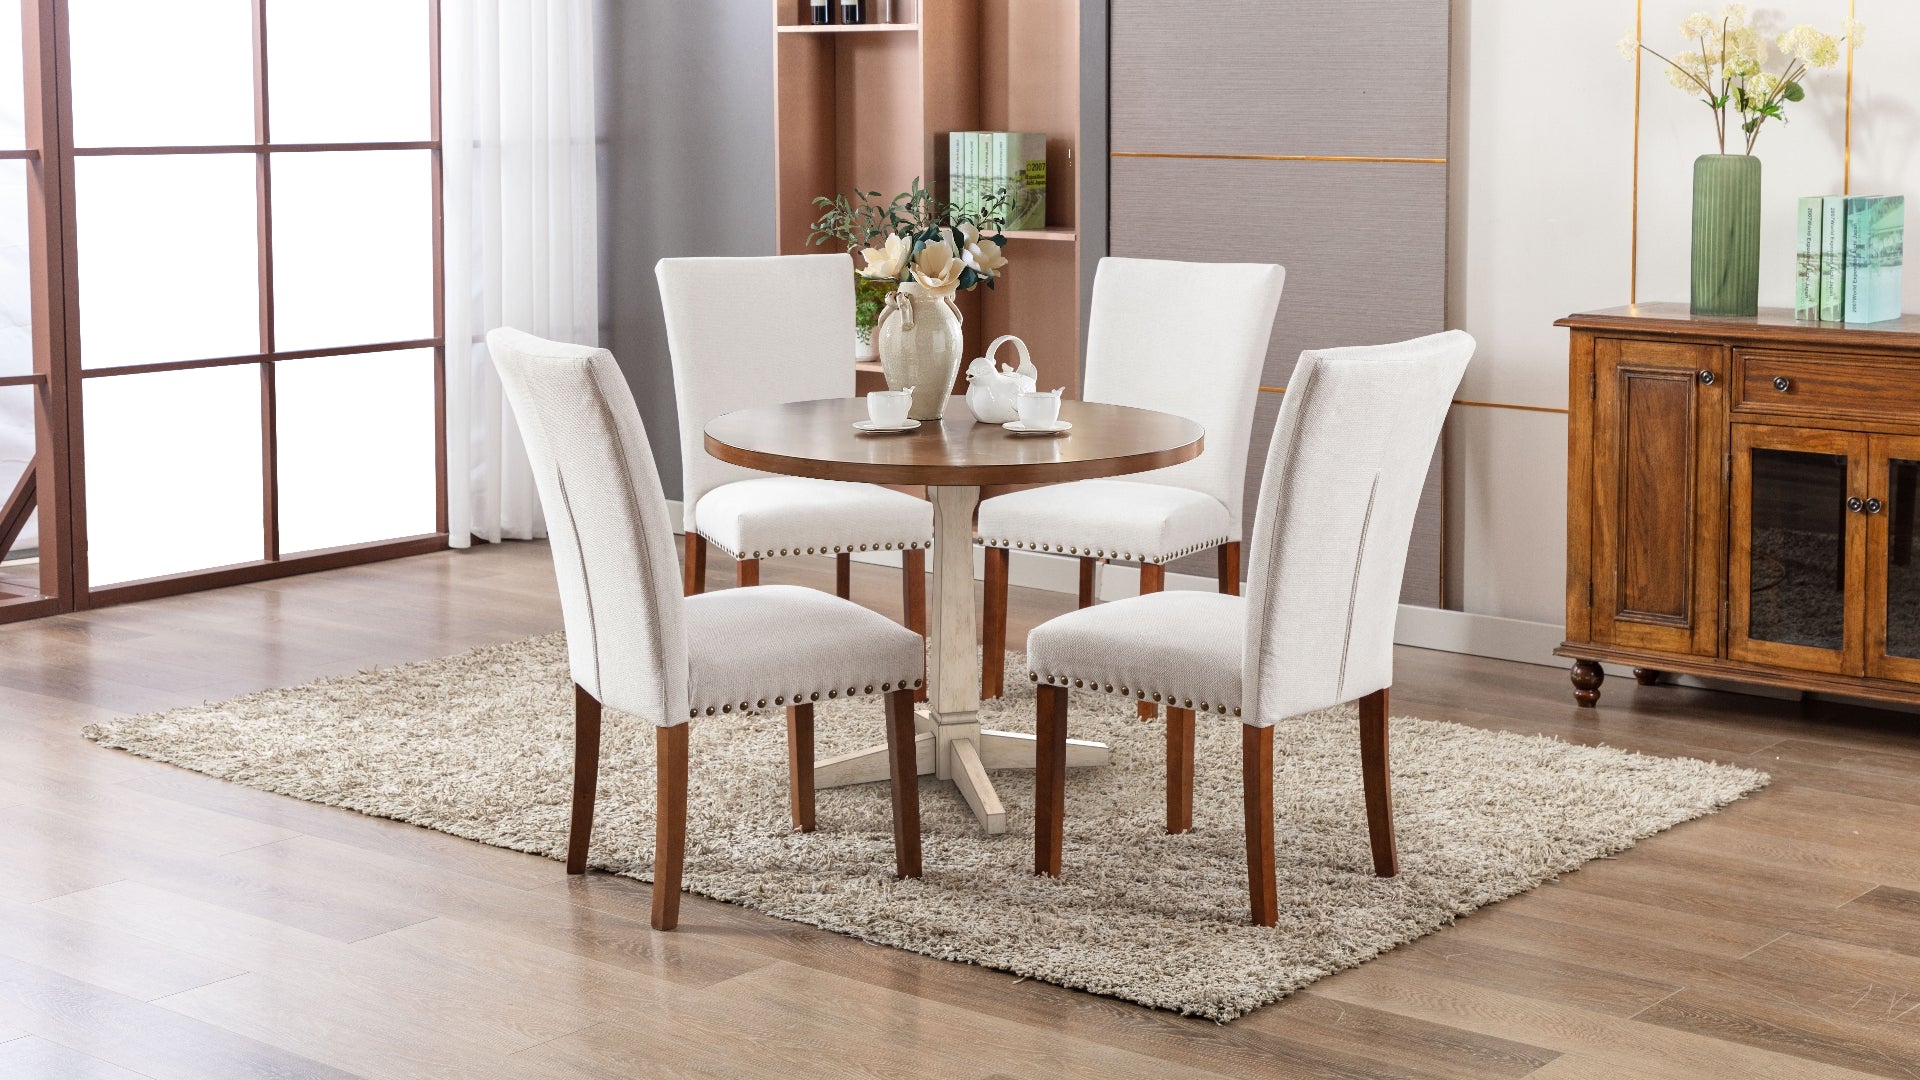 Premium Dining Chairs for Every Home | Colamy Home – COLAMYHome